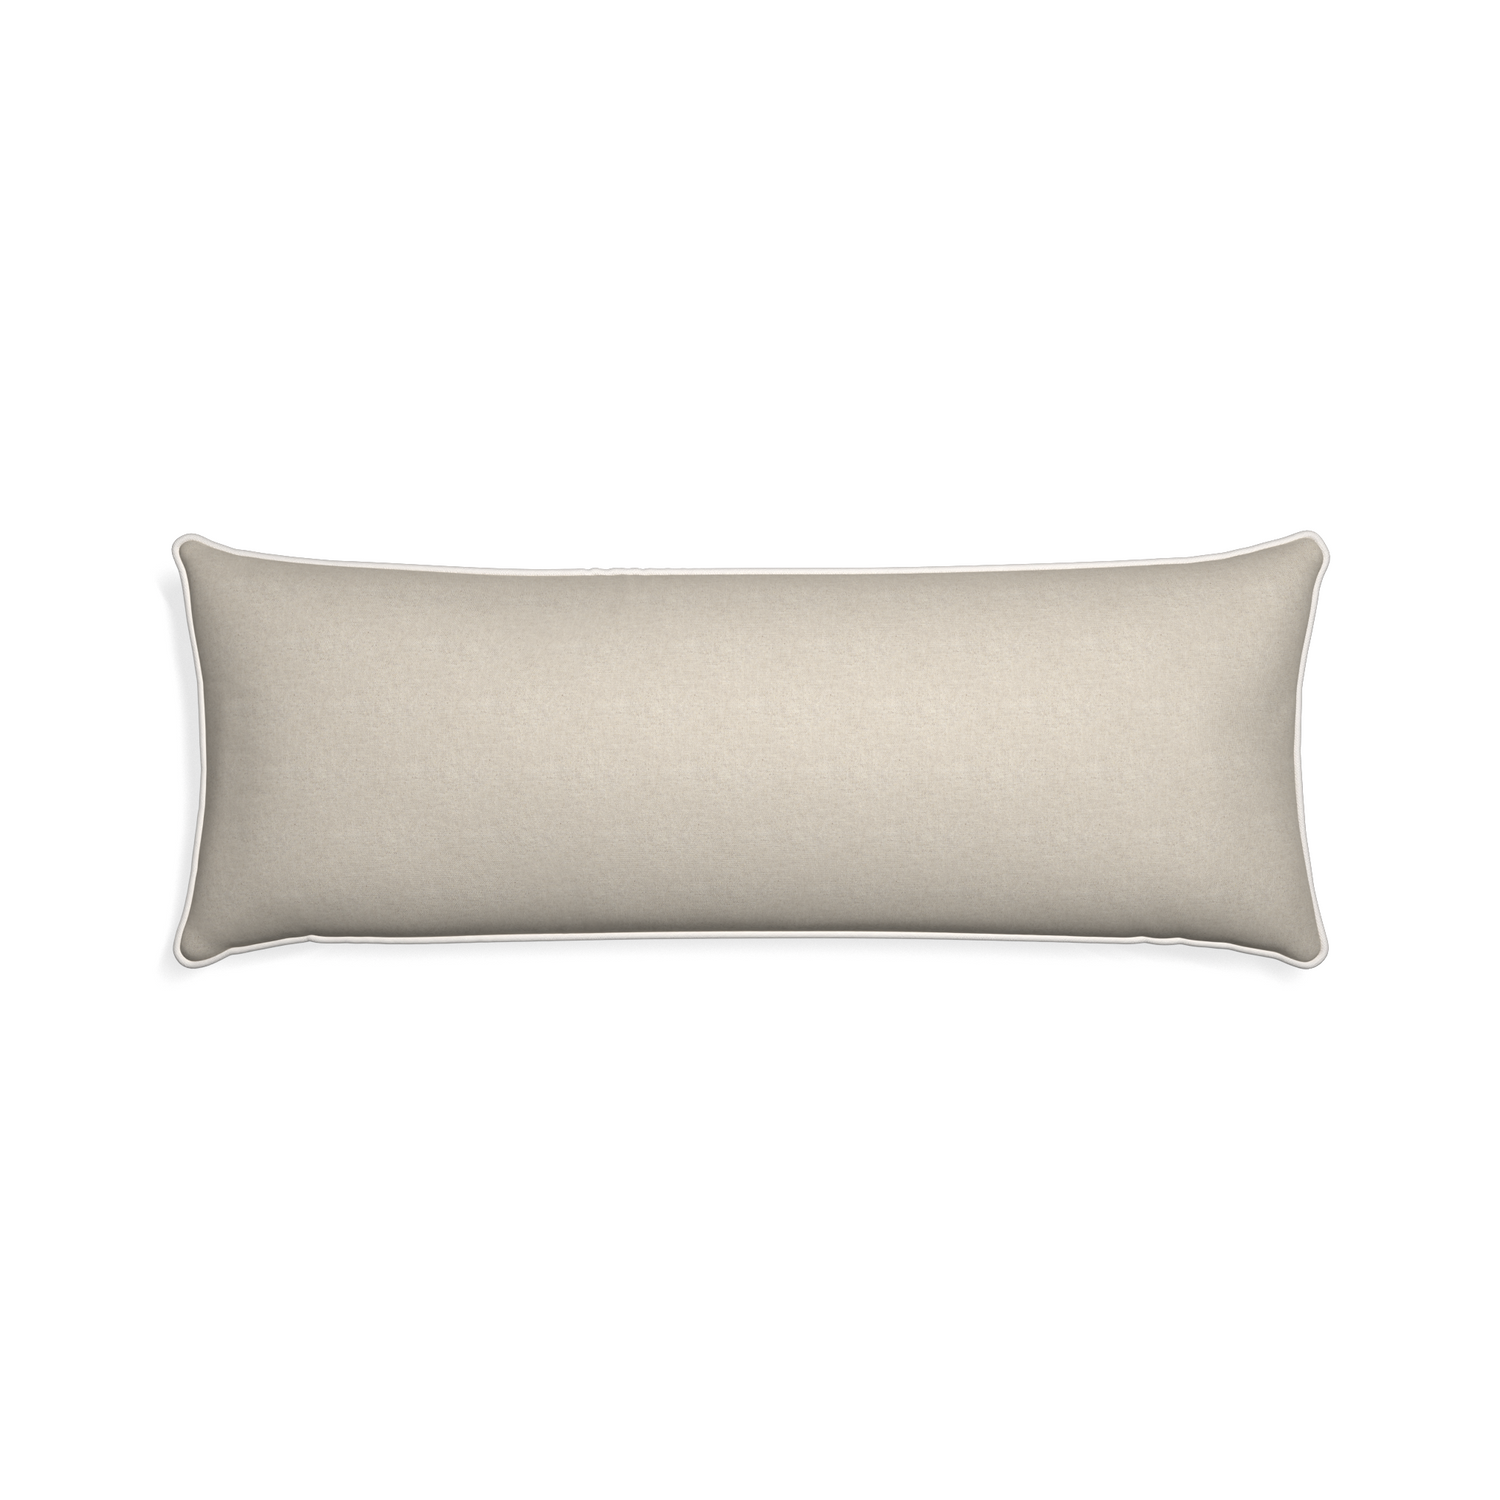 Xl-lumbar oat custom light brownpillow with snow piping on white background